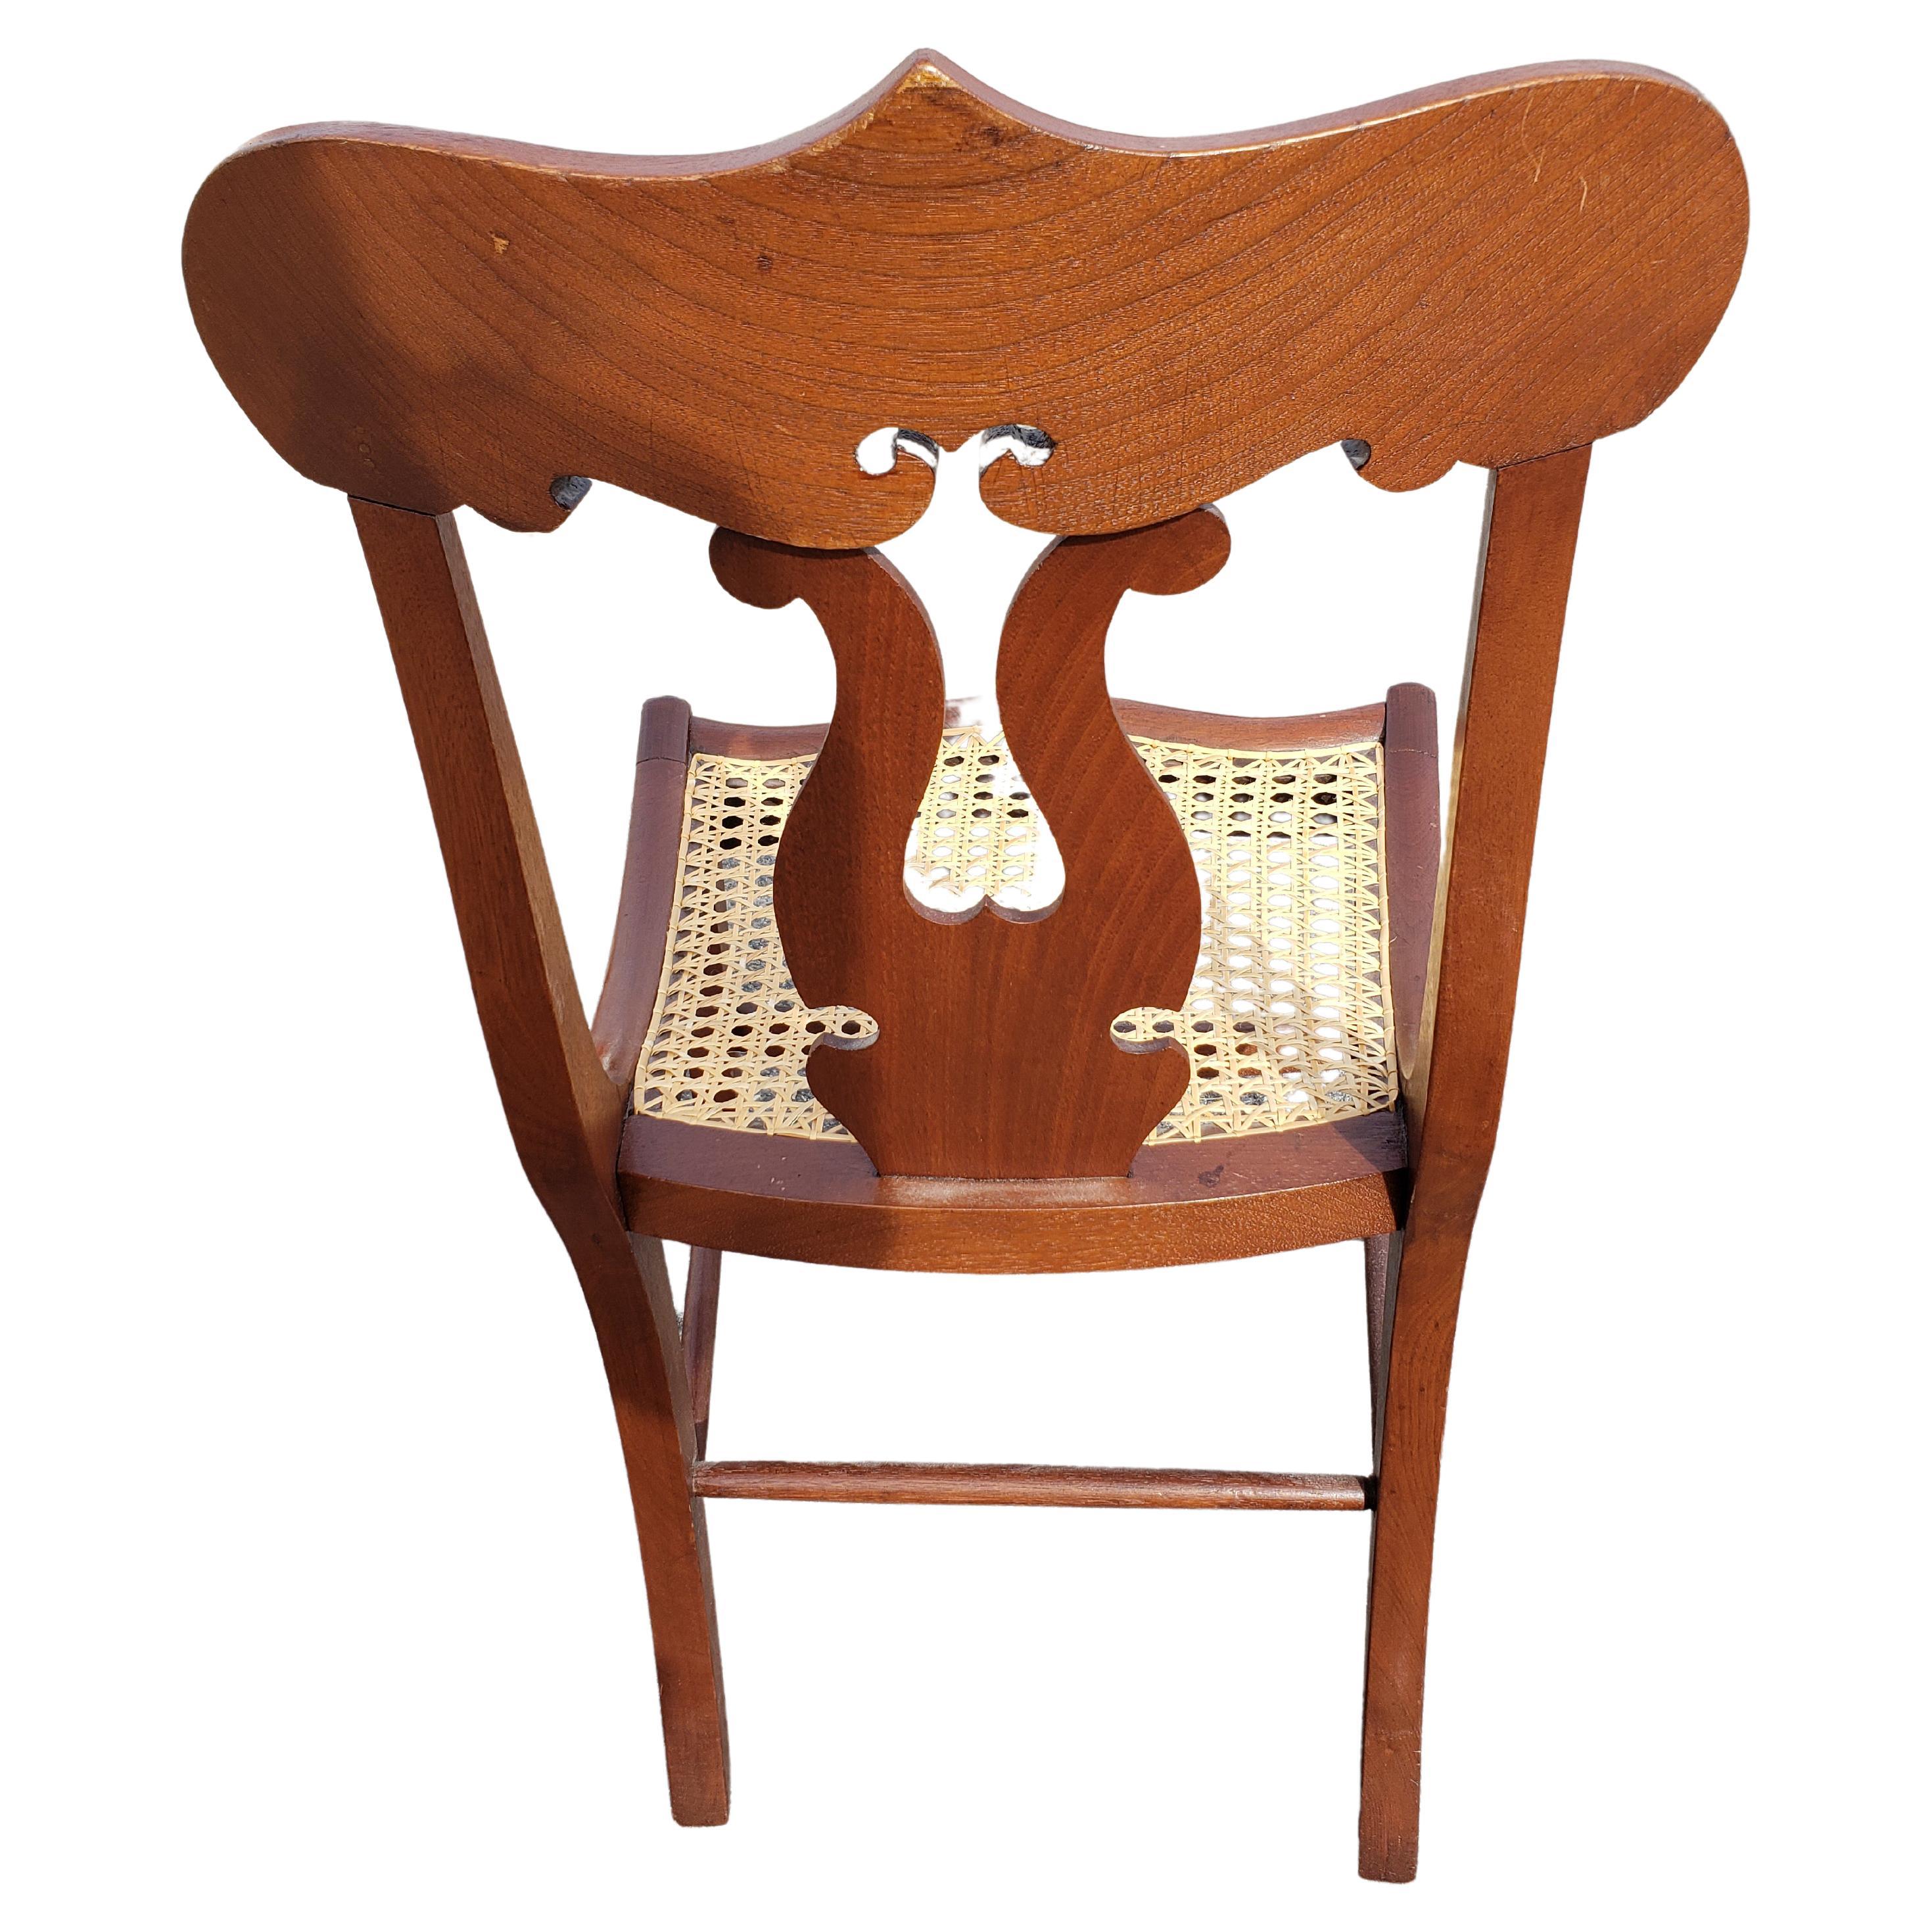 American Empire Flame Mahogany Cane Seat Chairs, circa 1890s a Pair For Sale 2